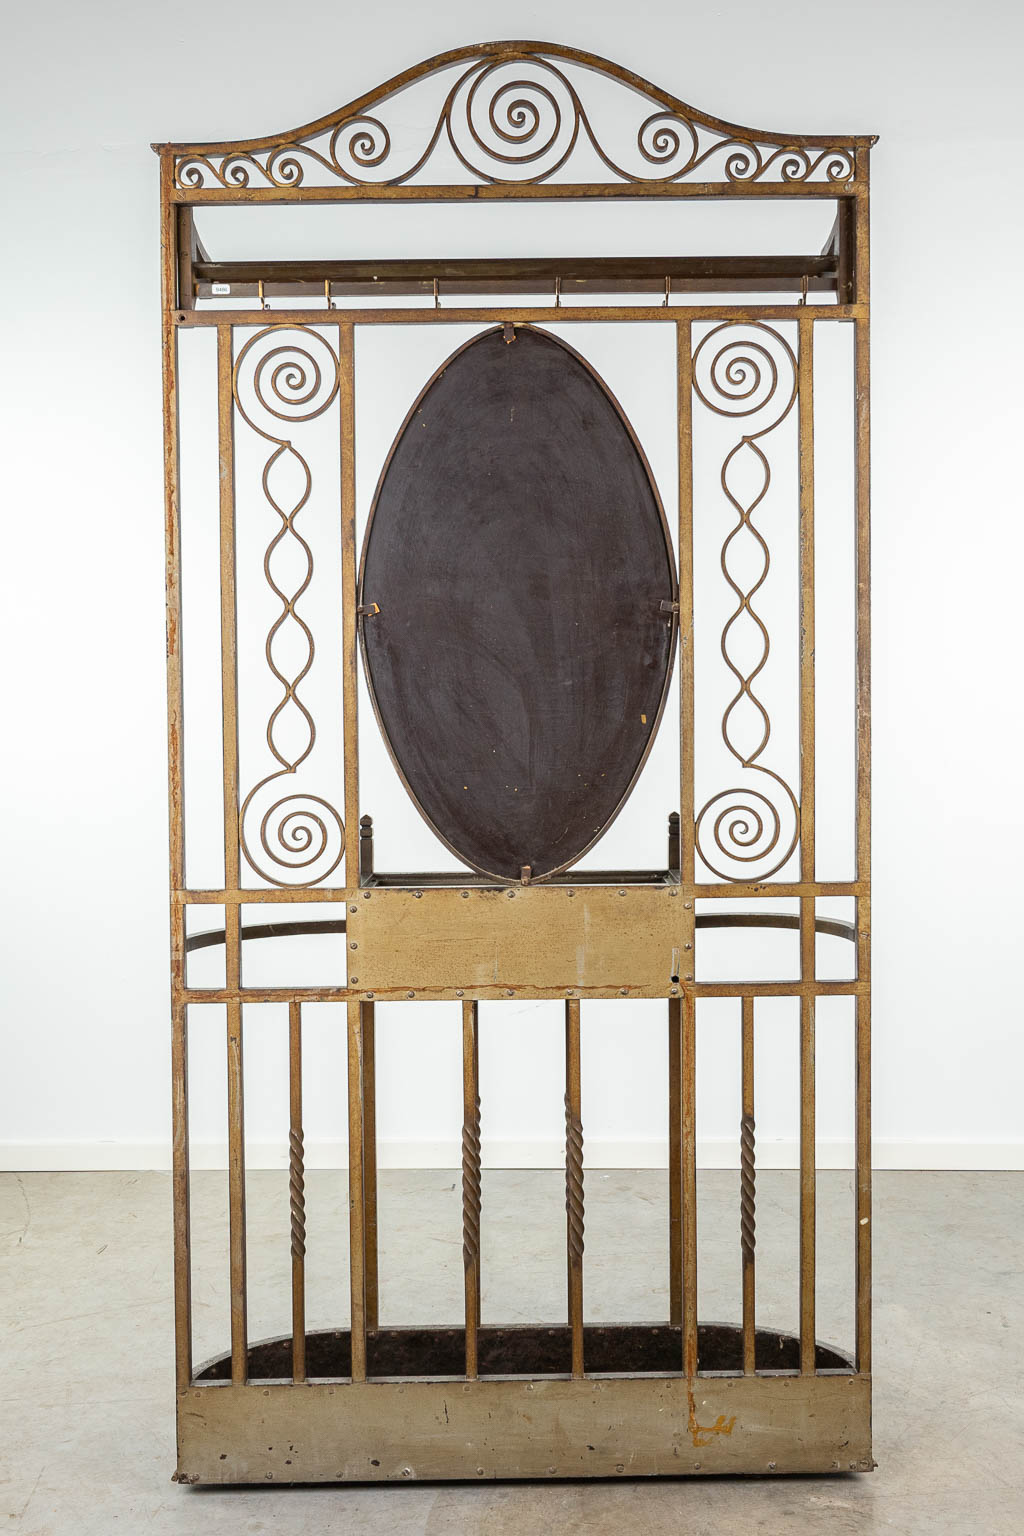 A coathanger and umbrella stand with mirror made of wrought iron and marked Victor Rabier. (H:208cm)